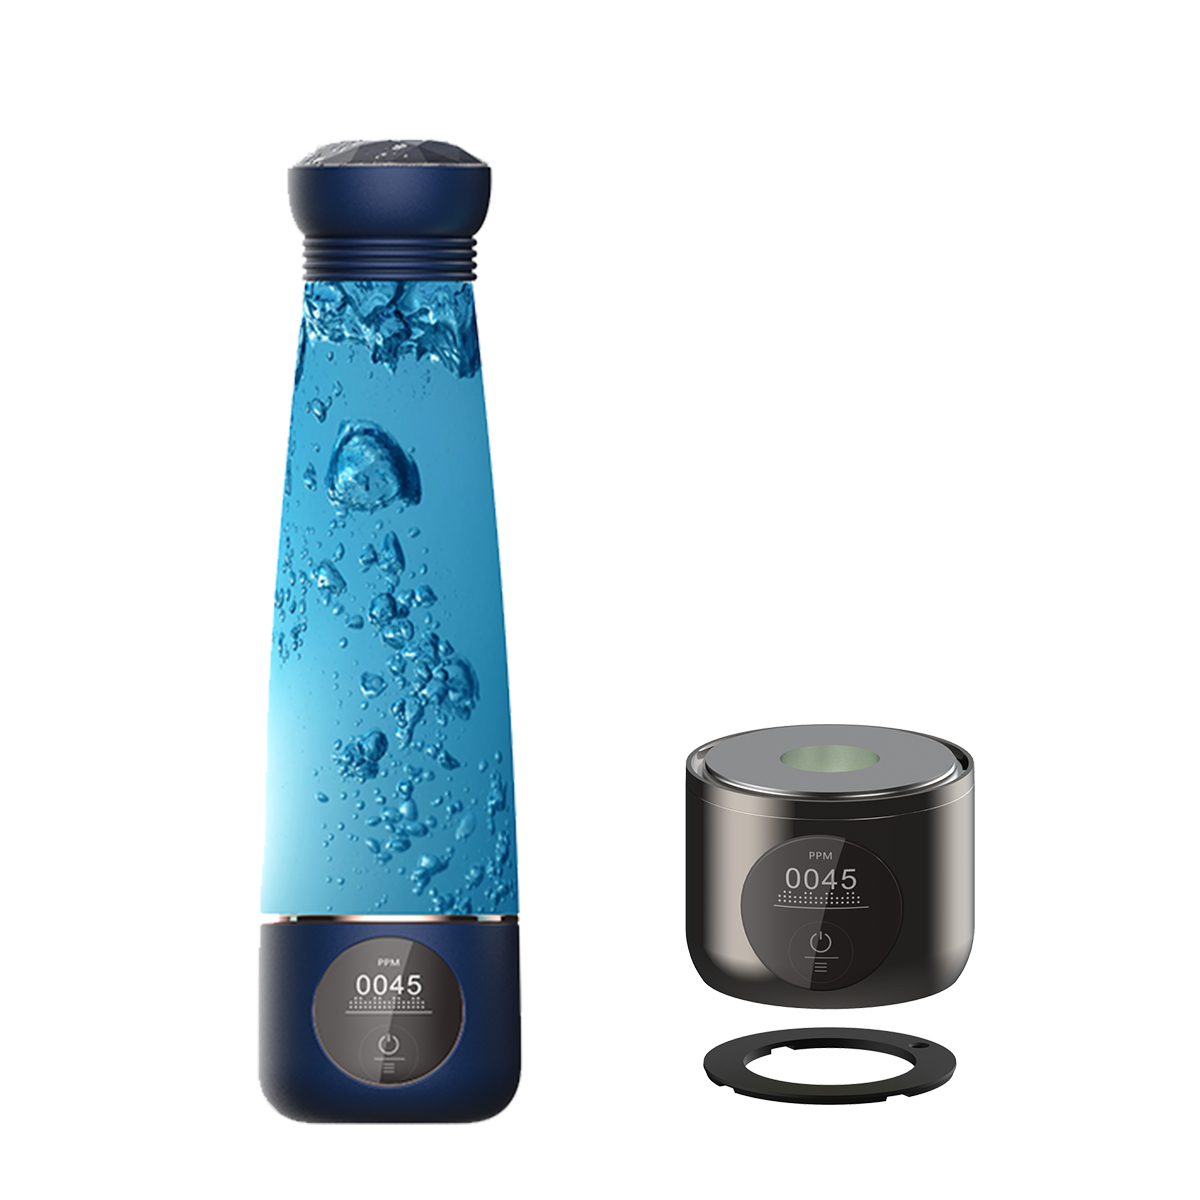 Olansi new portable hydrogen rich water bottle with hydrogen content over 3000ppb, contact me to learn more.